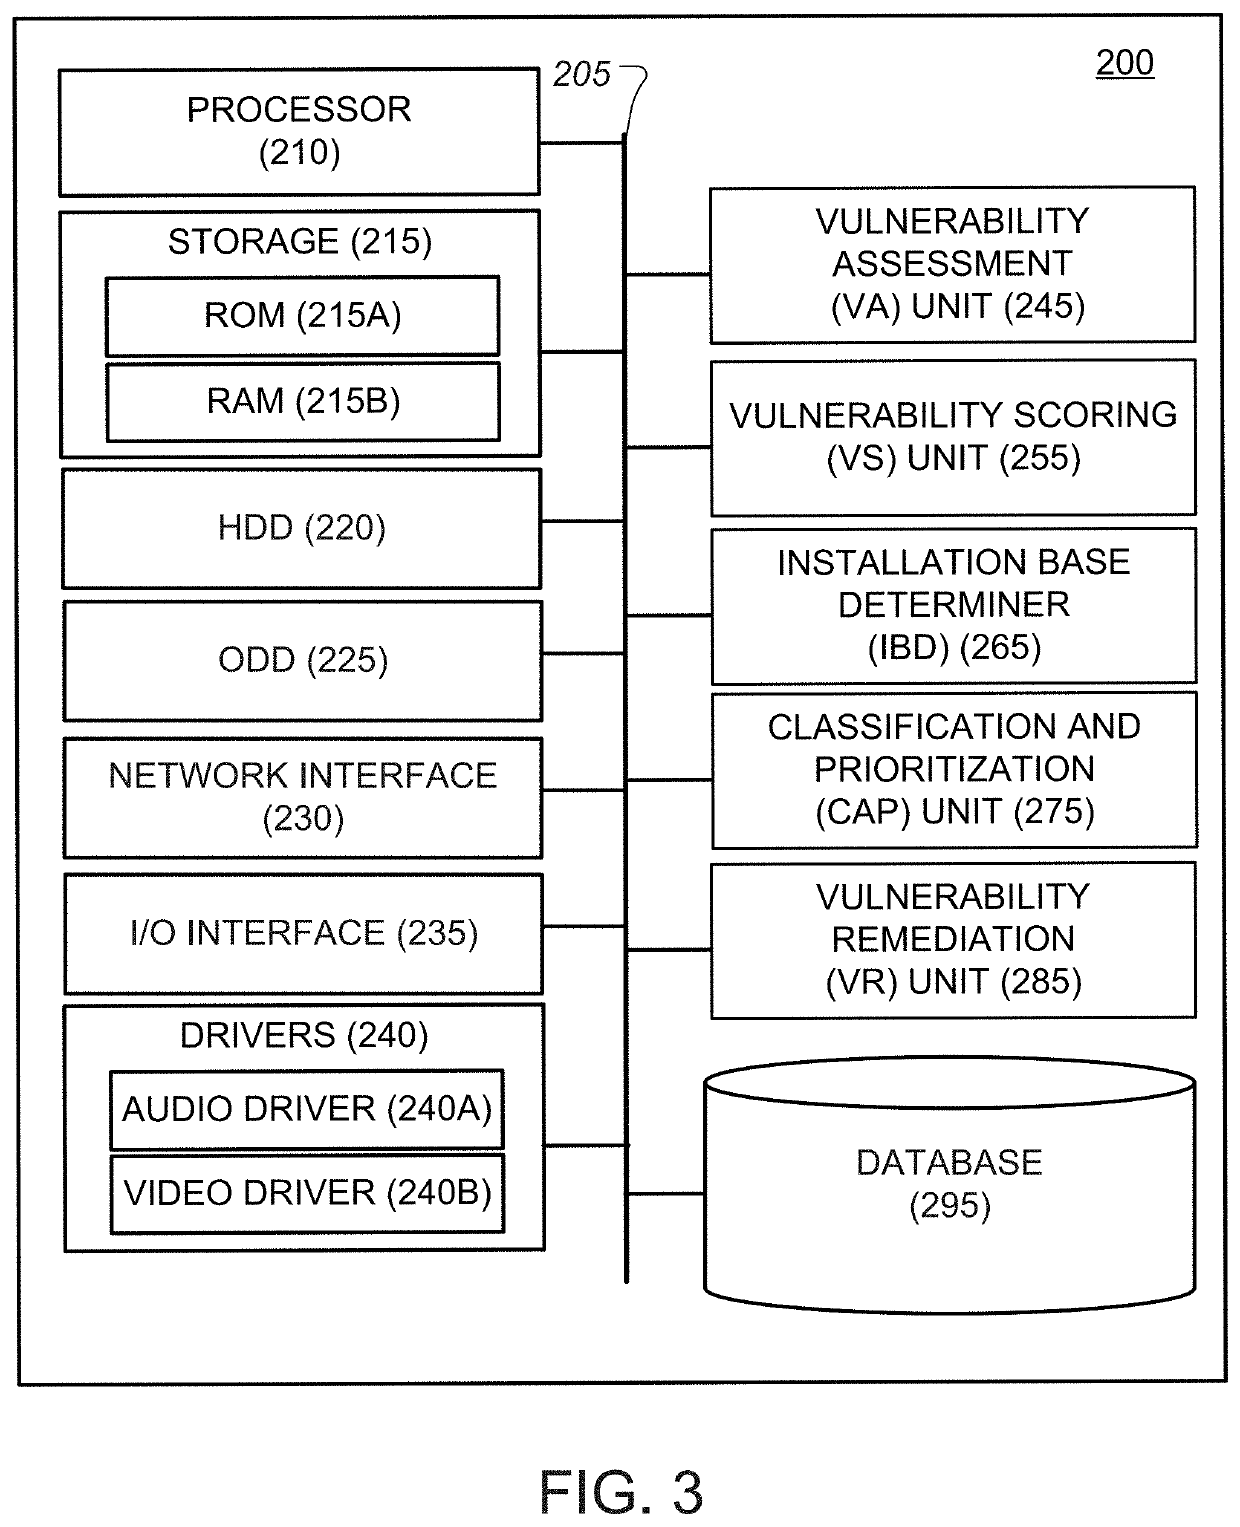 Cybersecurity vulnerability classification and remediation based on installation base